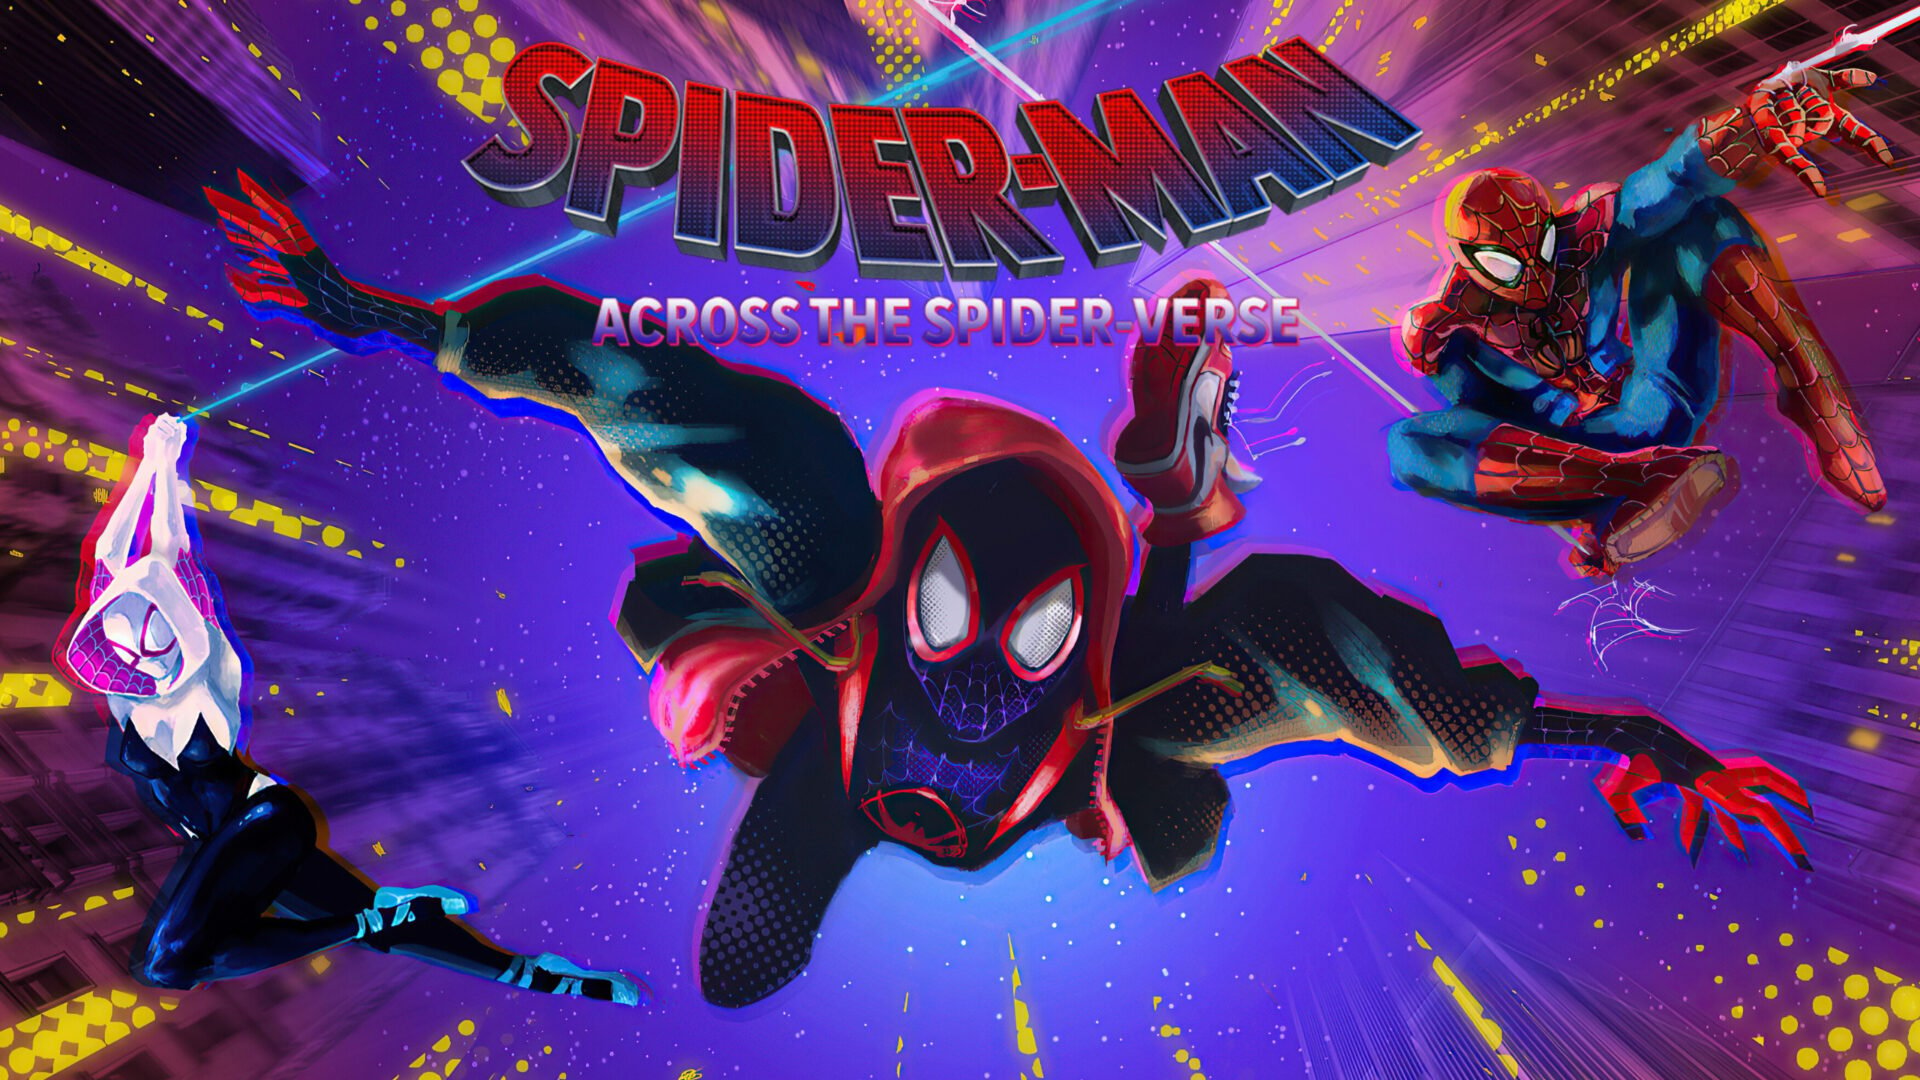 SPIDER MAN: ACROSS THE SPIDER VERSE' Will Have 6 Dominant Animation Styles